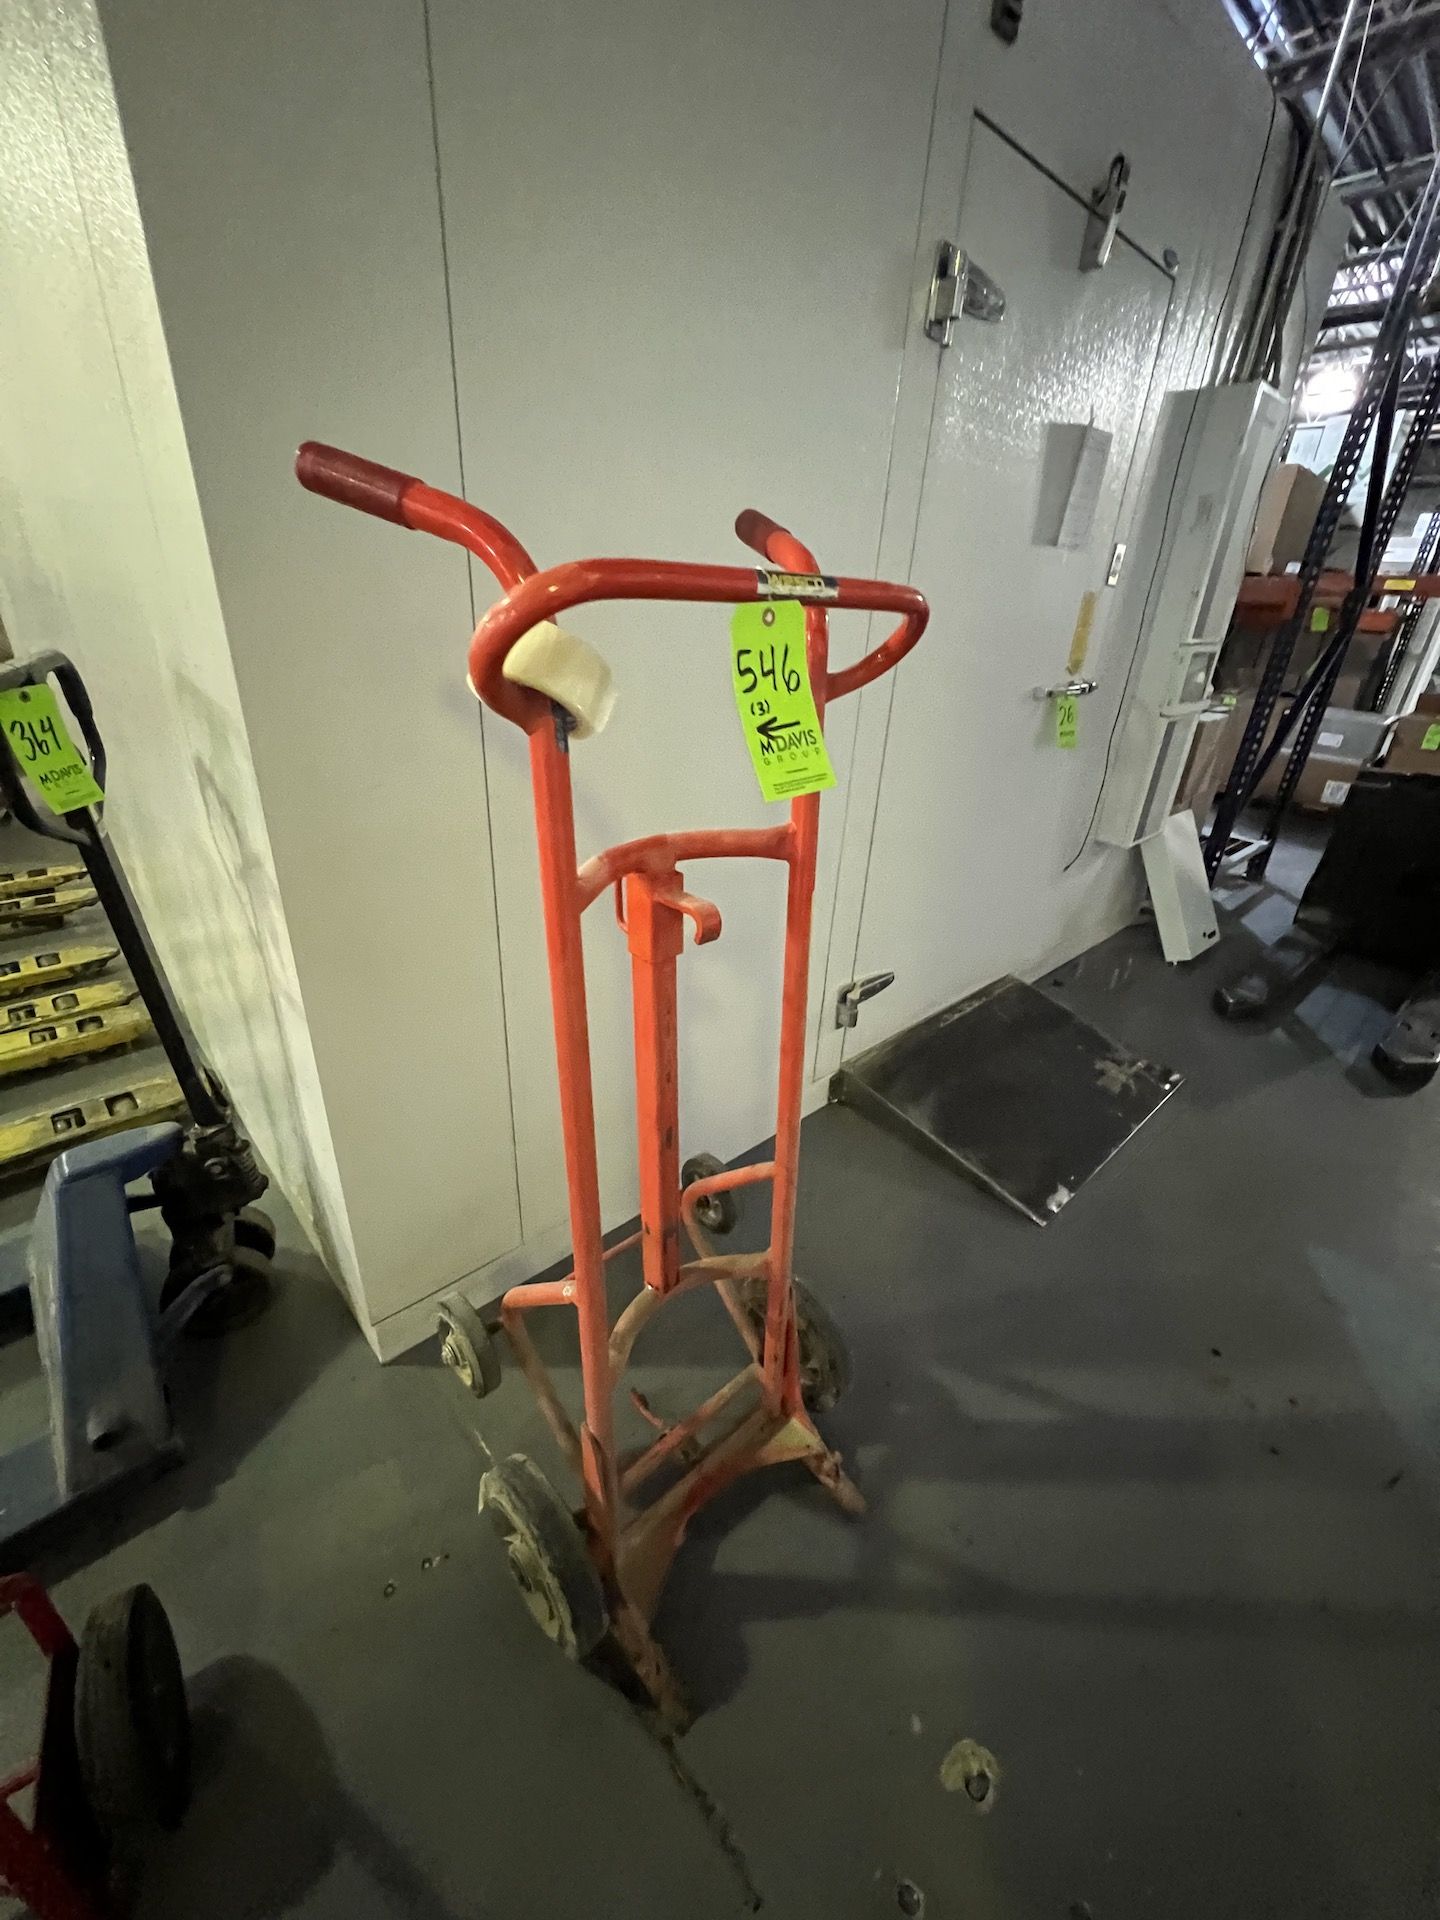 MATERIAL HANDLING EQUIPMENT, INCLUDES (2) 2-WHEEL DOLLIES AND HYDRAULIC PALLET JACK - Image 6 of 6